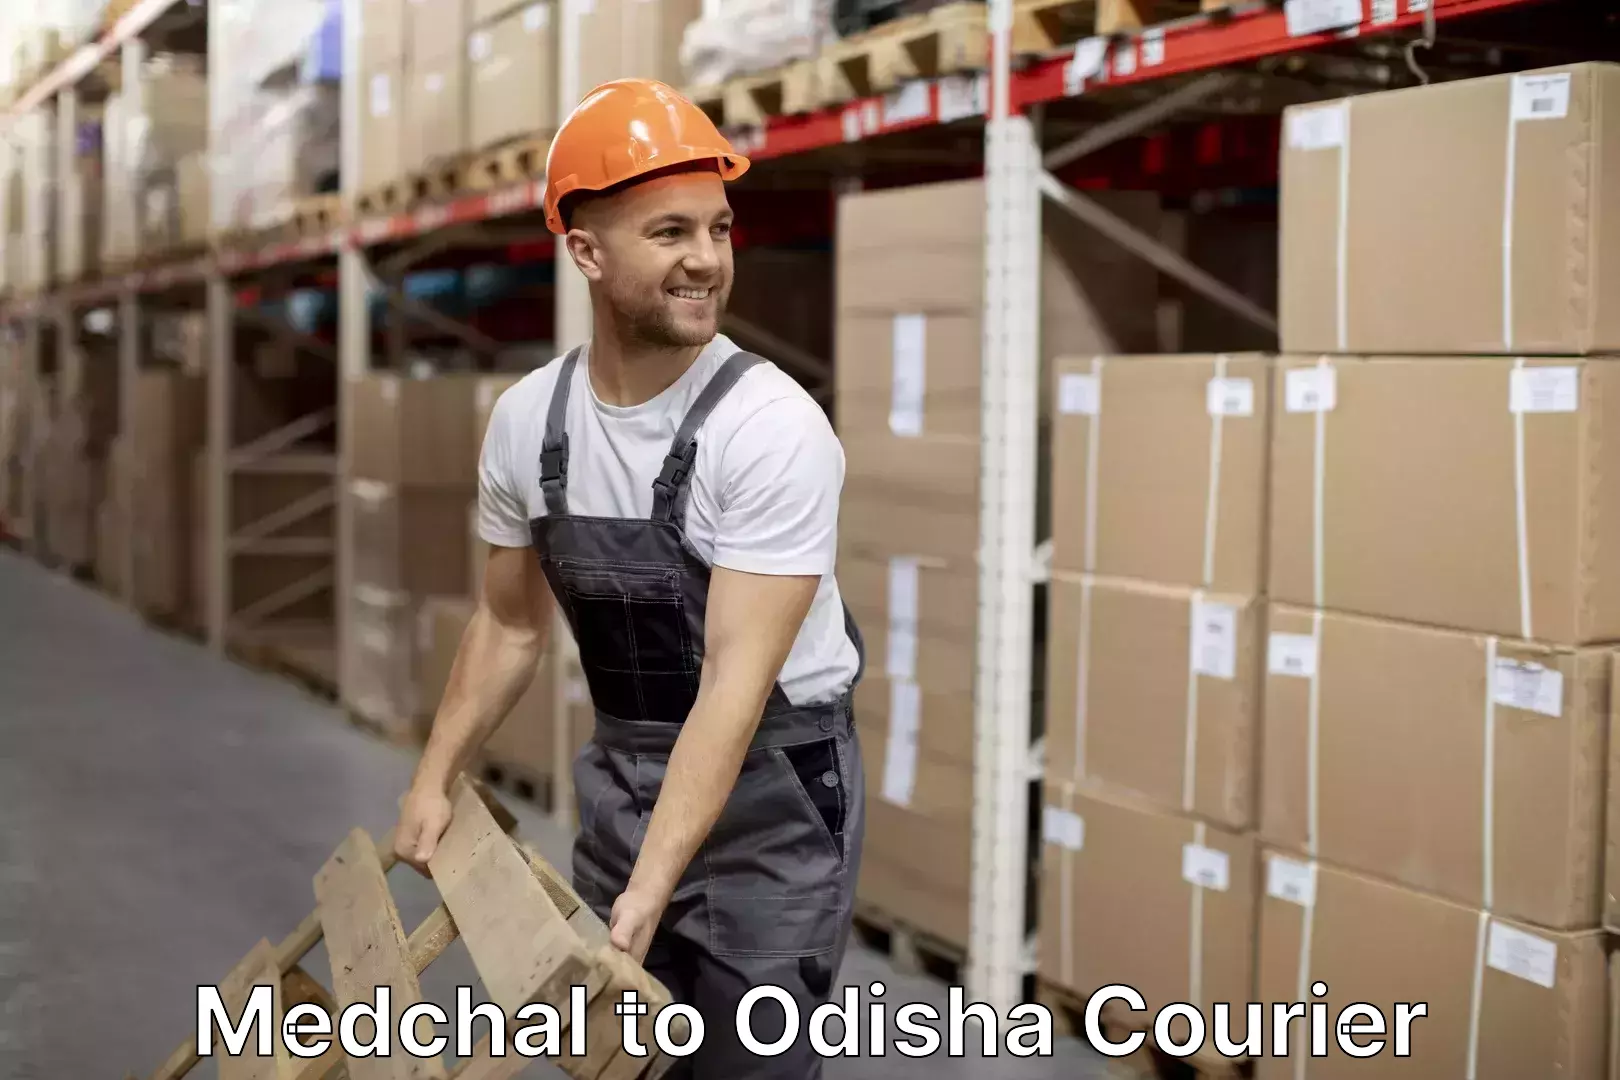 Furniture delivery service Medchal to Odisha